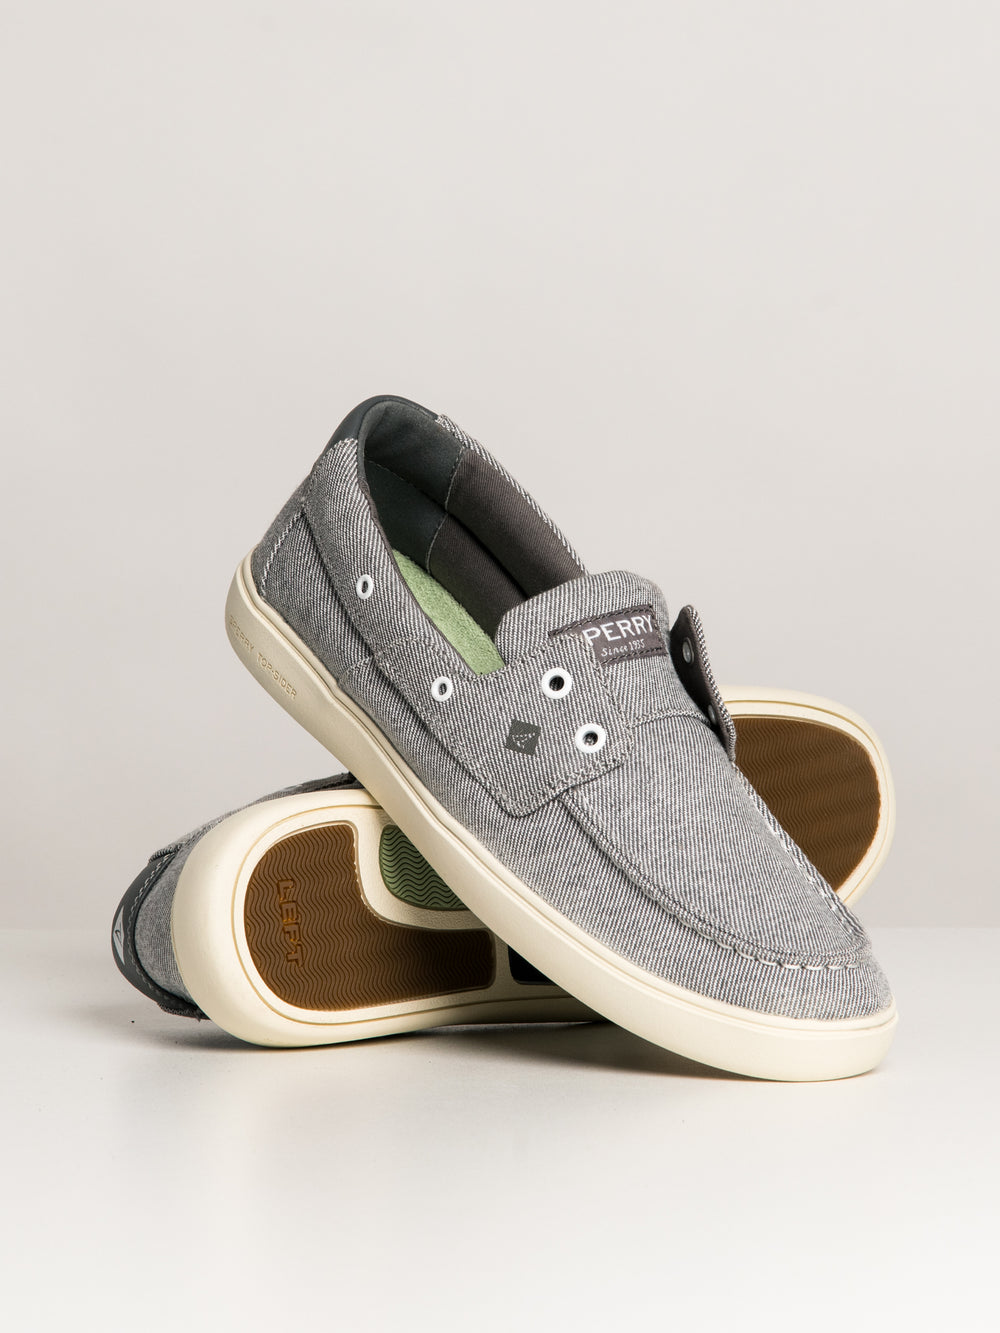 MENS SPERRY OUTER BANKS 2-EYE BOAT SHOE - CLEARANCE